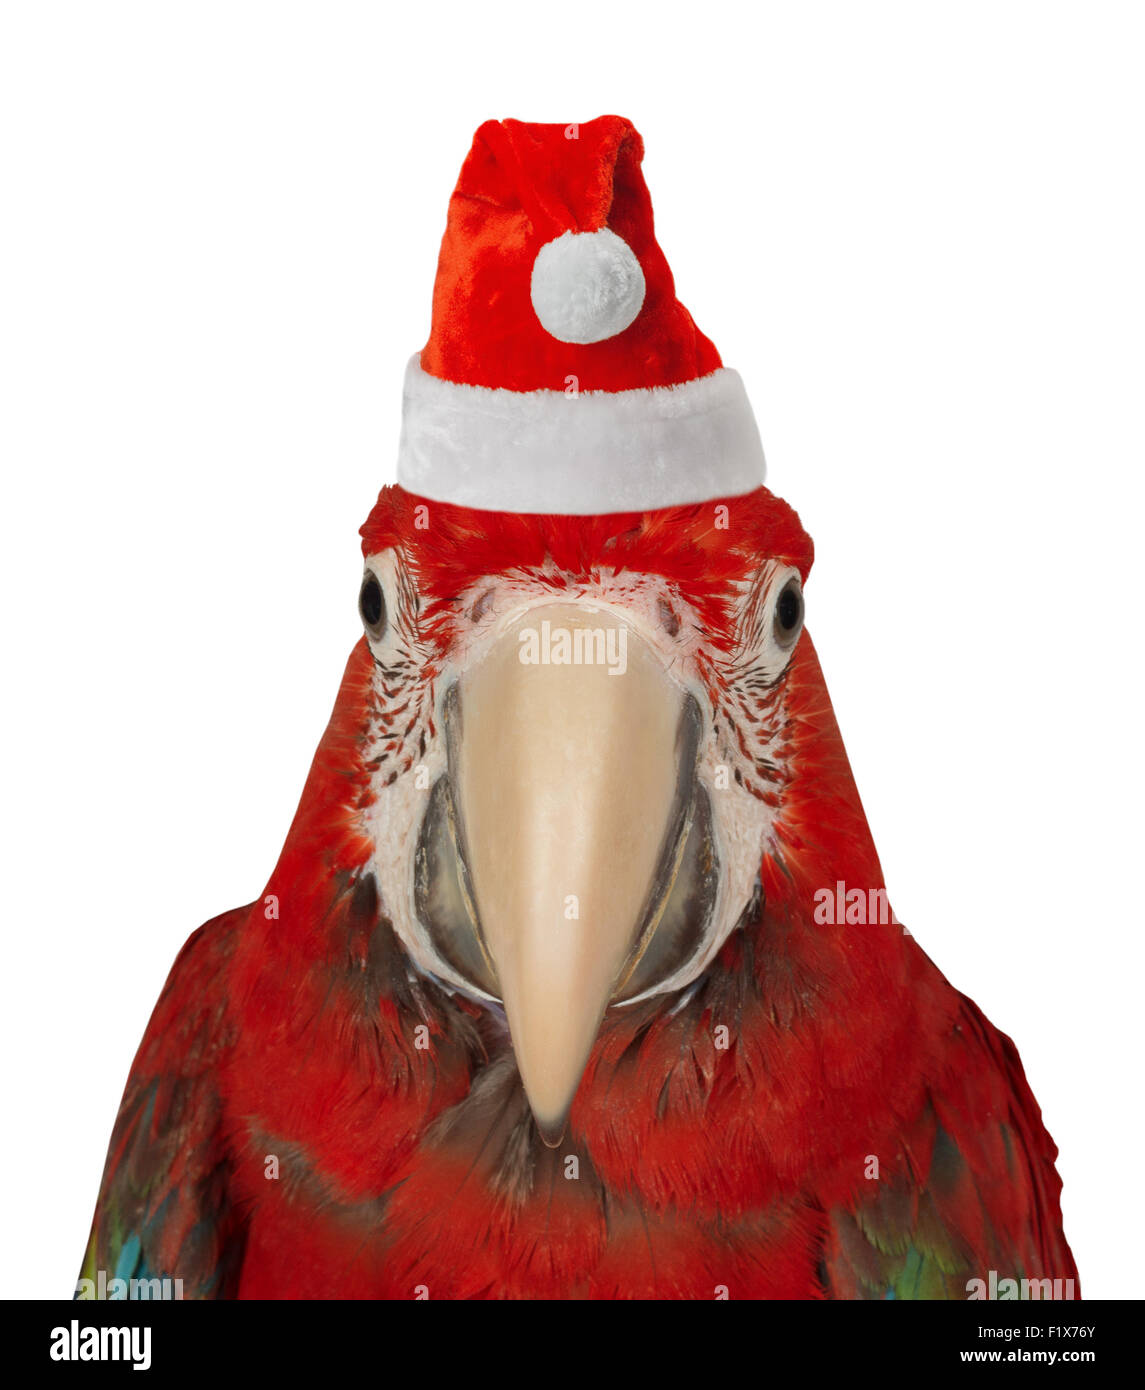 Parrot Hat High Resolution Stock Photography and Images - Alamy